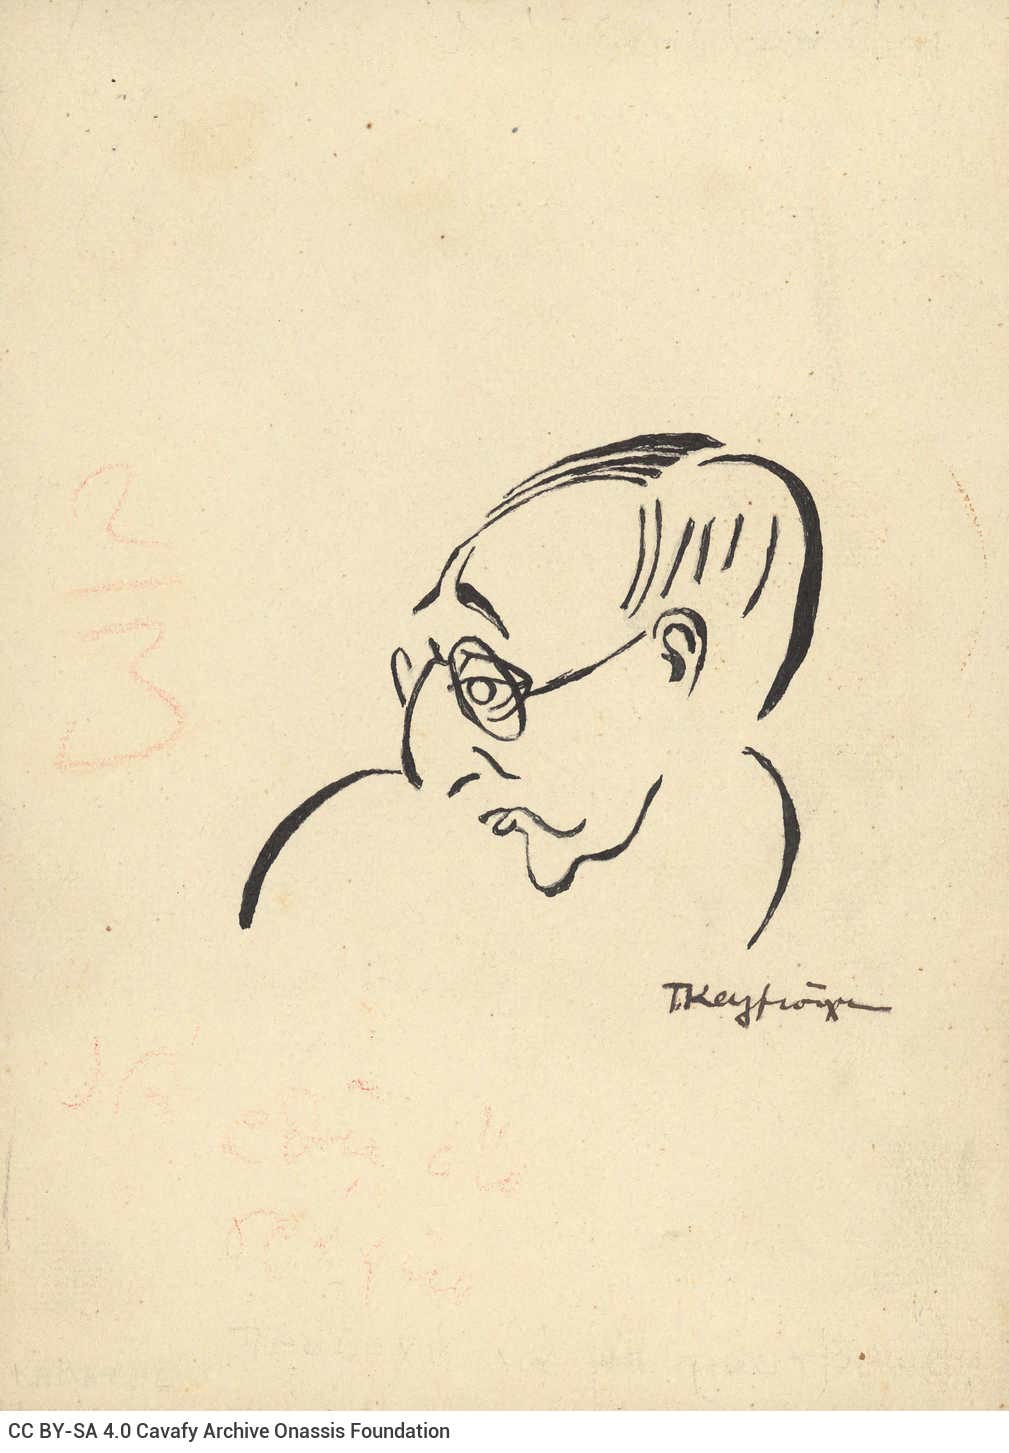 Sketch in ink by Takis Kalmouchos on one side of a sheet. It depicts Cavafy in profile, looking to the left. The artist's sig